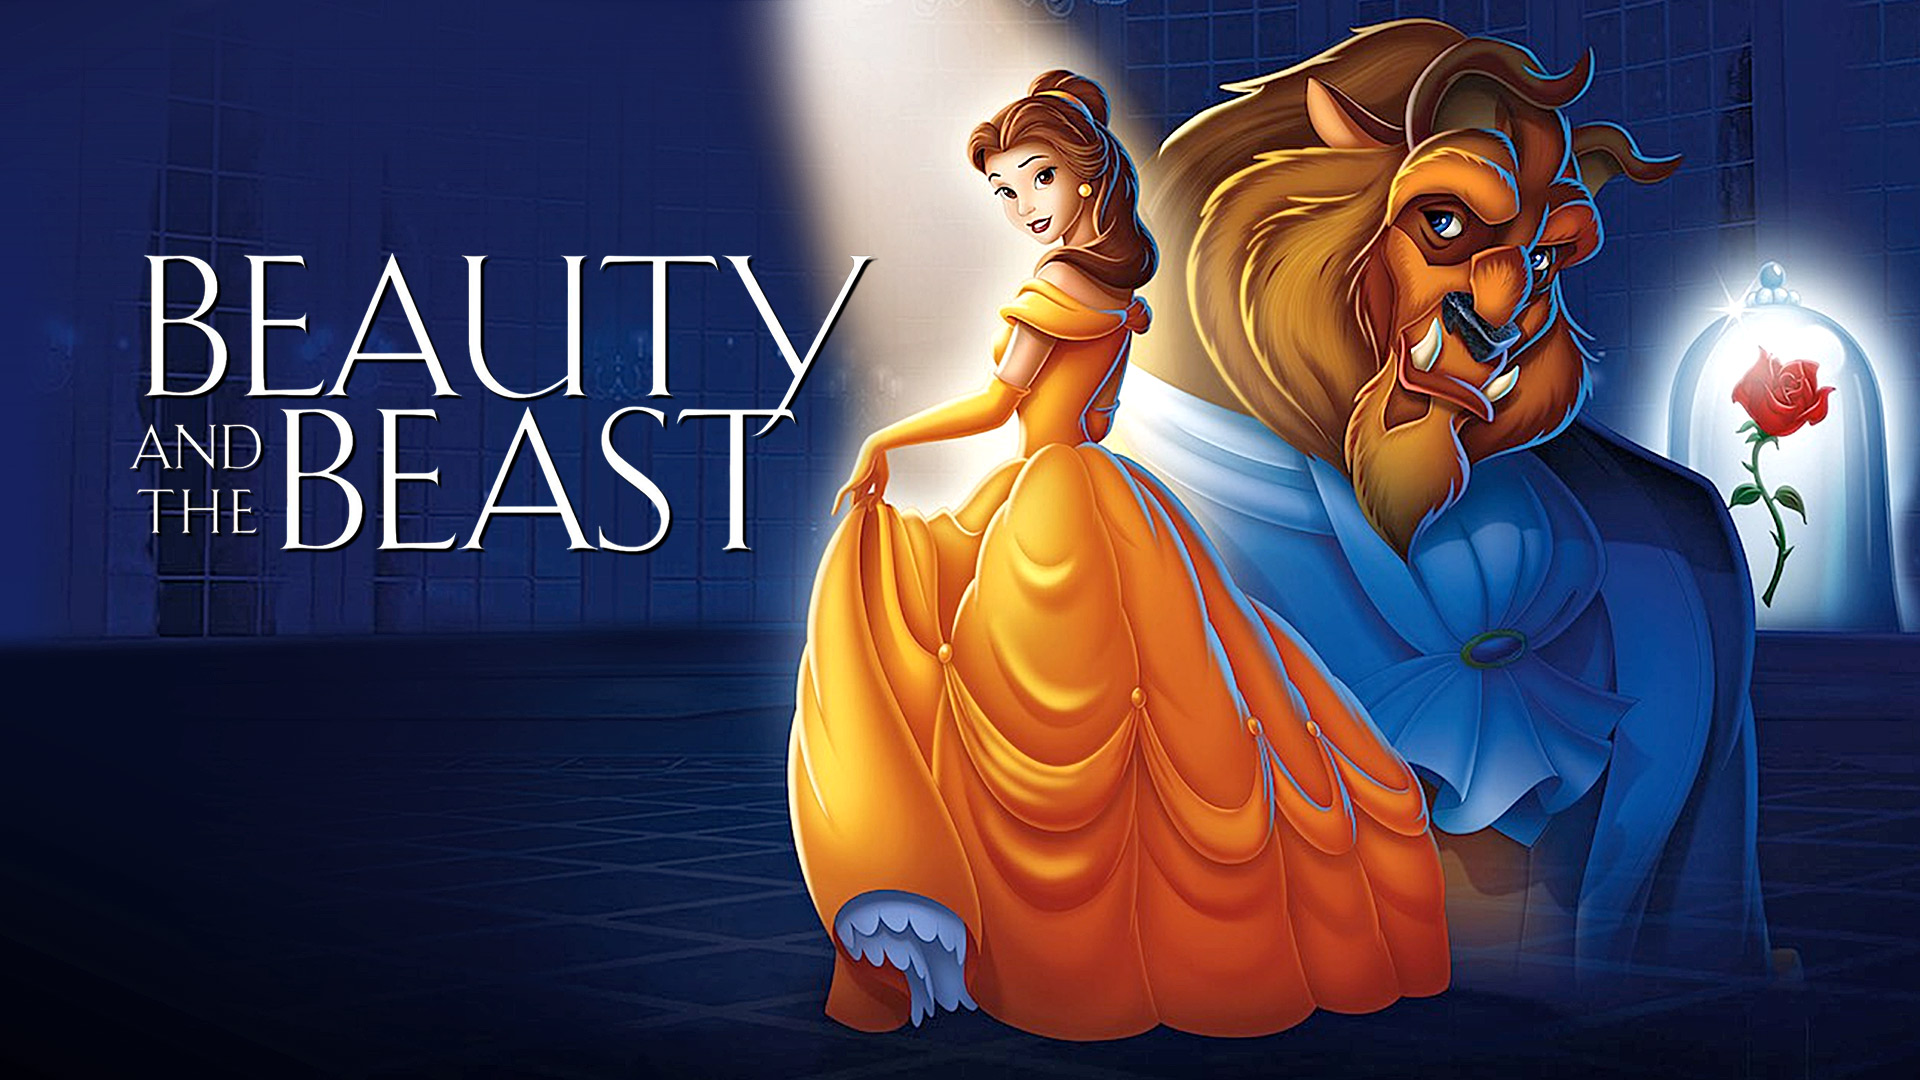 Plaza Classic Film Fest - Beauty and The Beast (Animated) at The Plaza Theatre Performing Arts Center